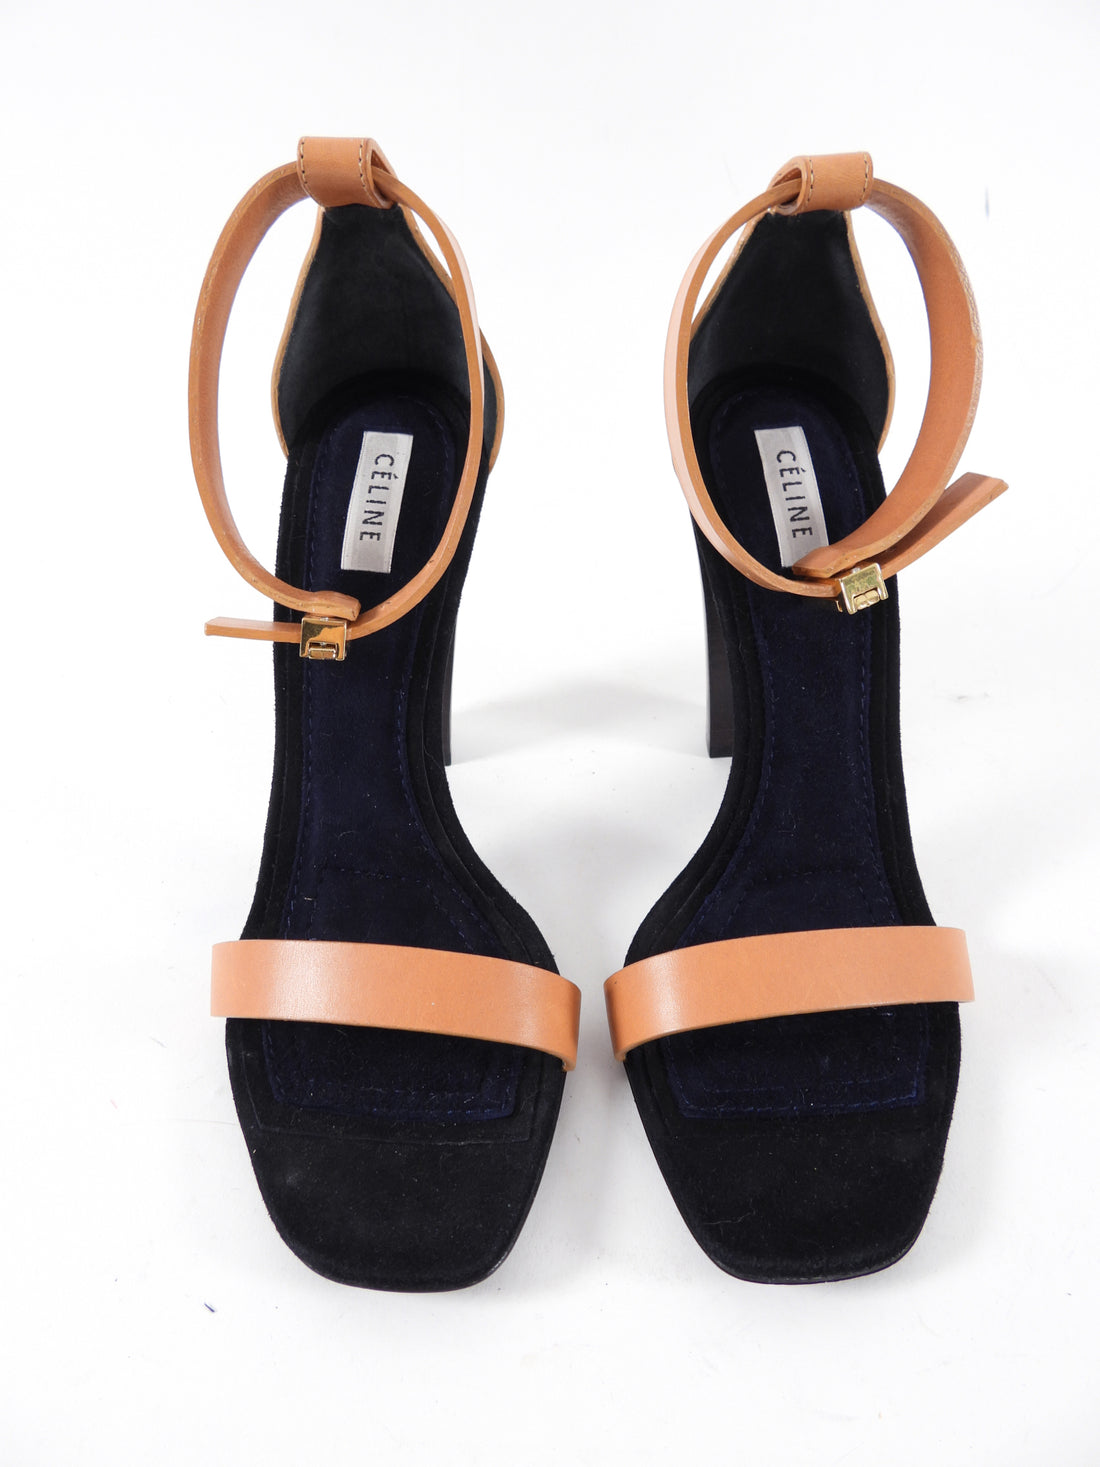 Celine Phoebe Philo Tan Leather and Black Sandals - 7.5 – I MISS YOU ...